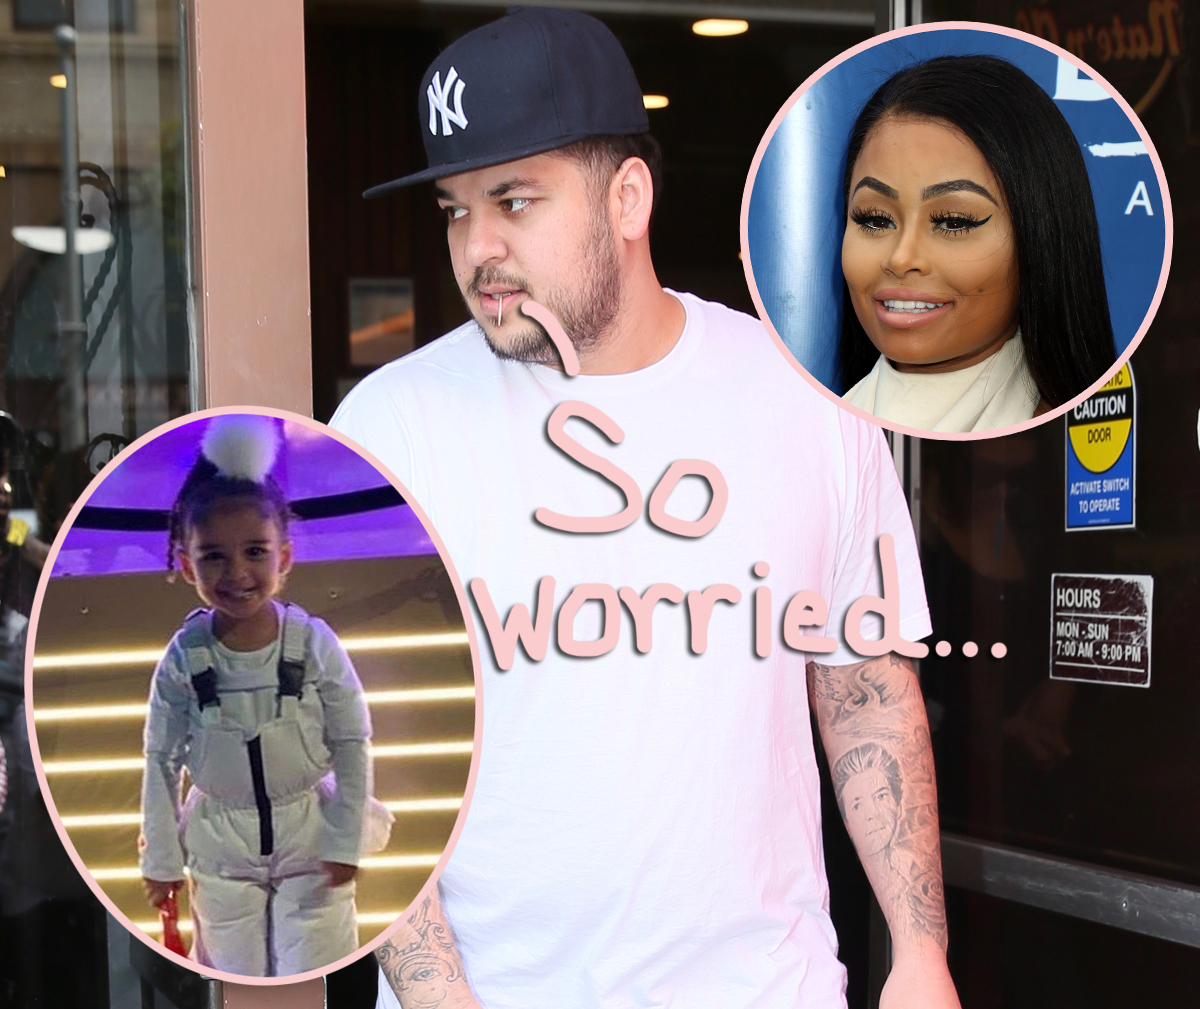 Rob Kardashian Makes Rare Comment About His, Blac Chyna's Child